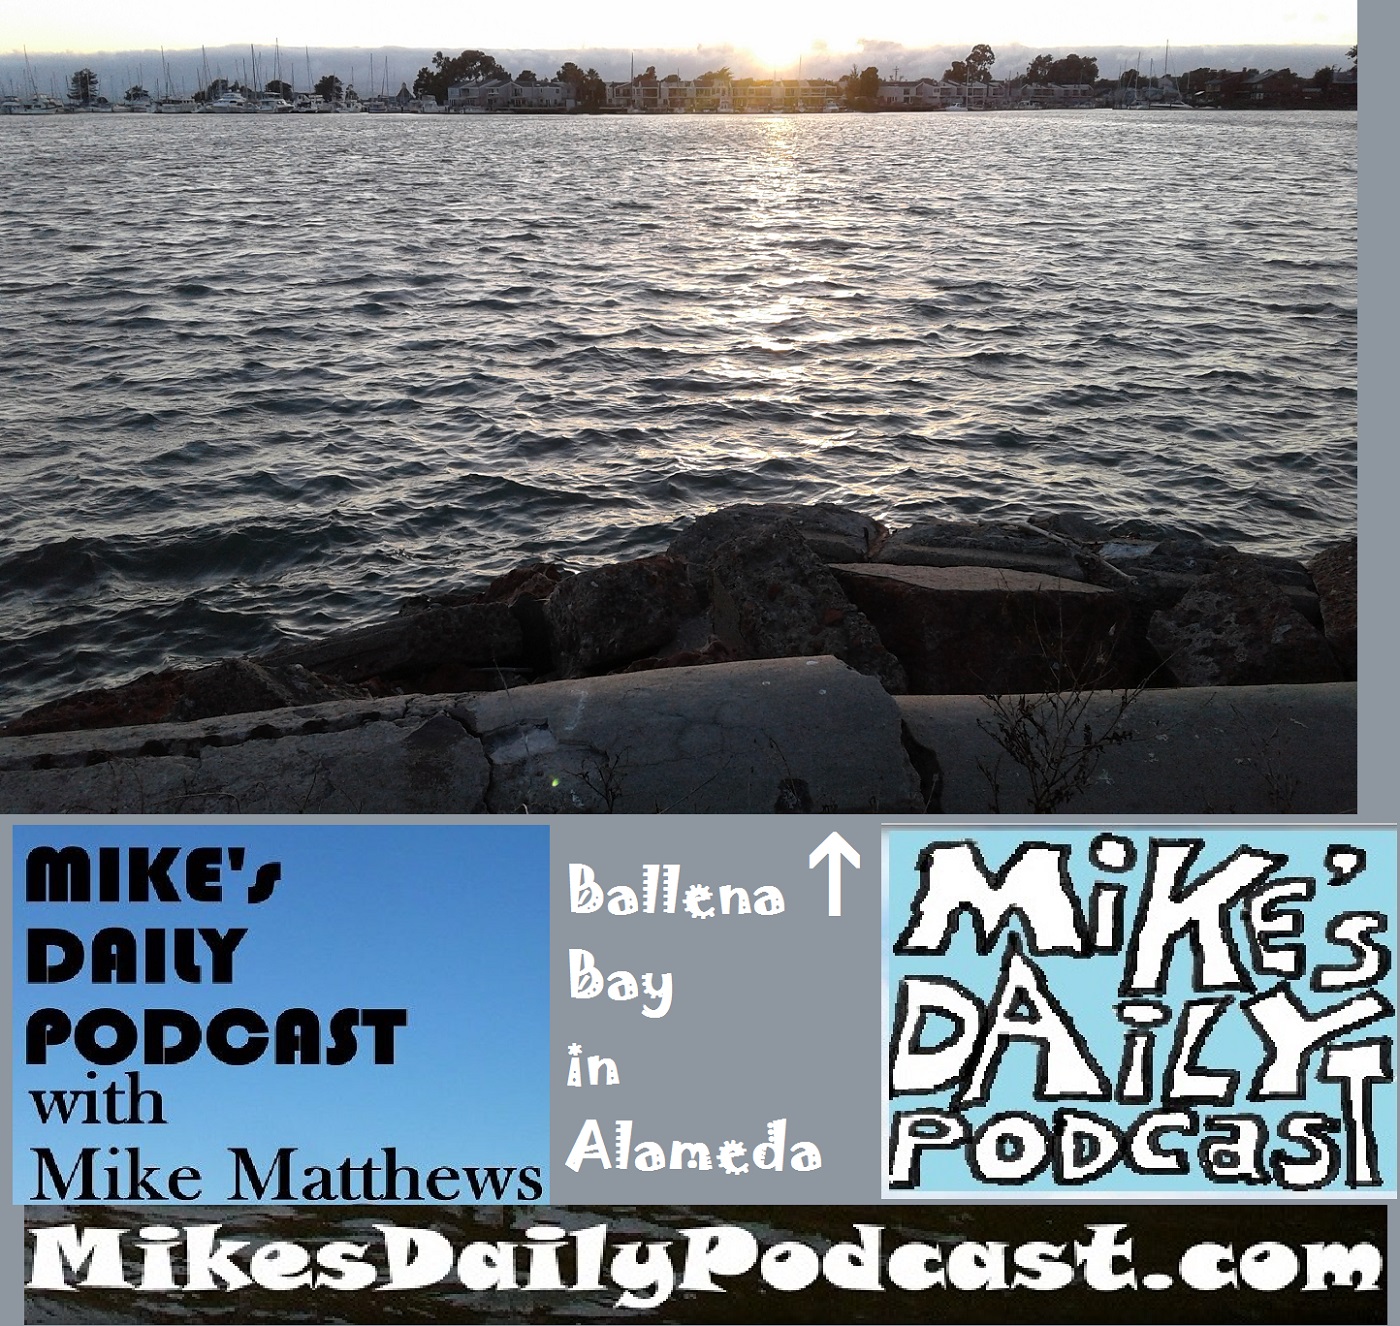 mikes-daily-podcast-1184-ballena-bay-alameda-sunset